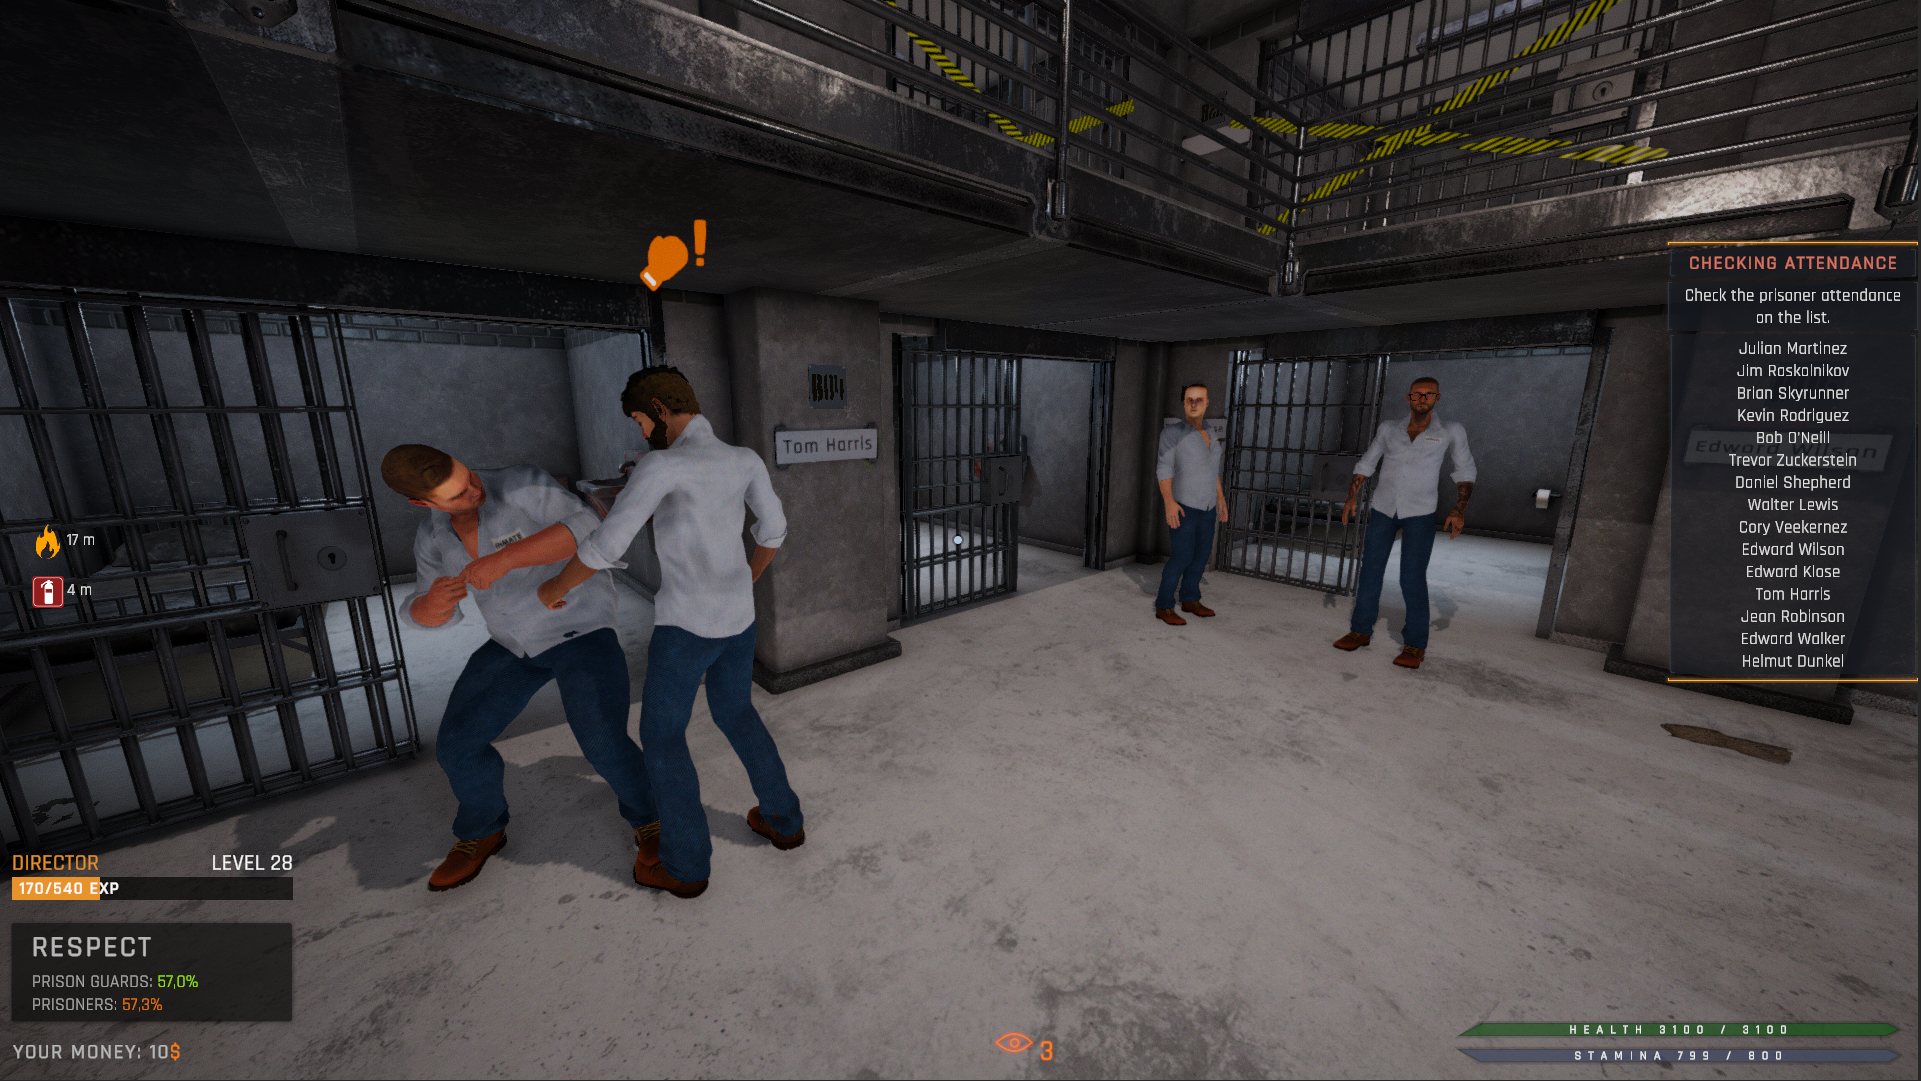 Prison Simulator Update Patch Notes Details, November 8, 2021 | Update, fixes and free skins! 3